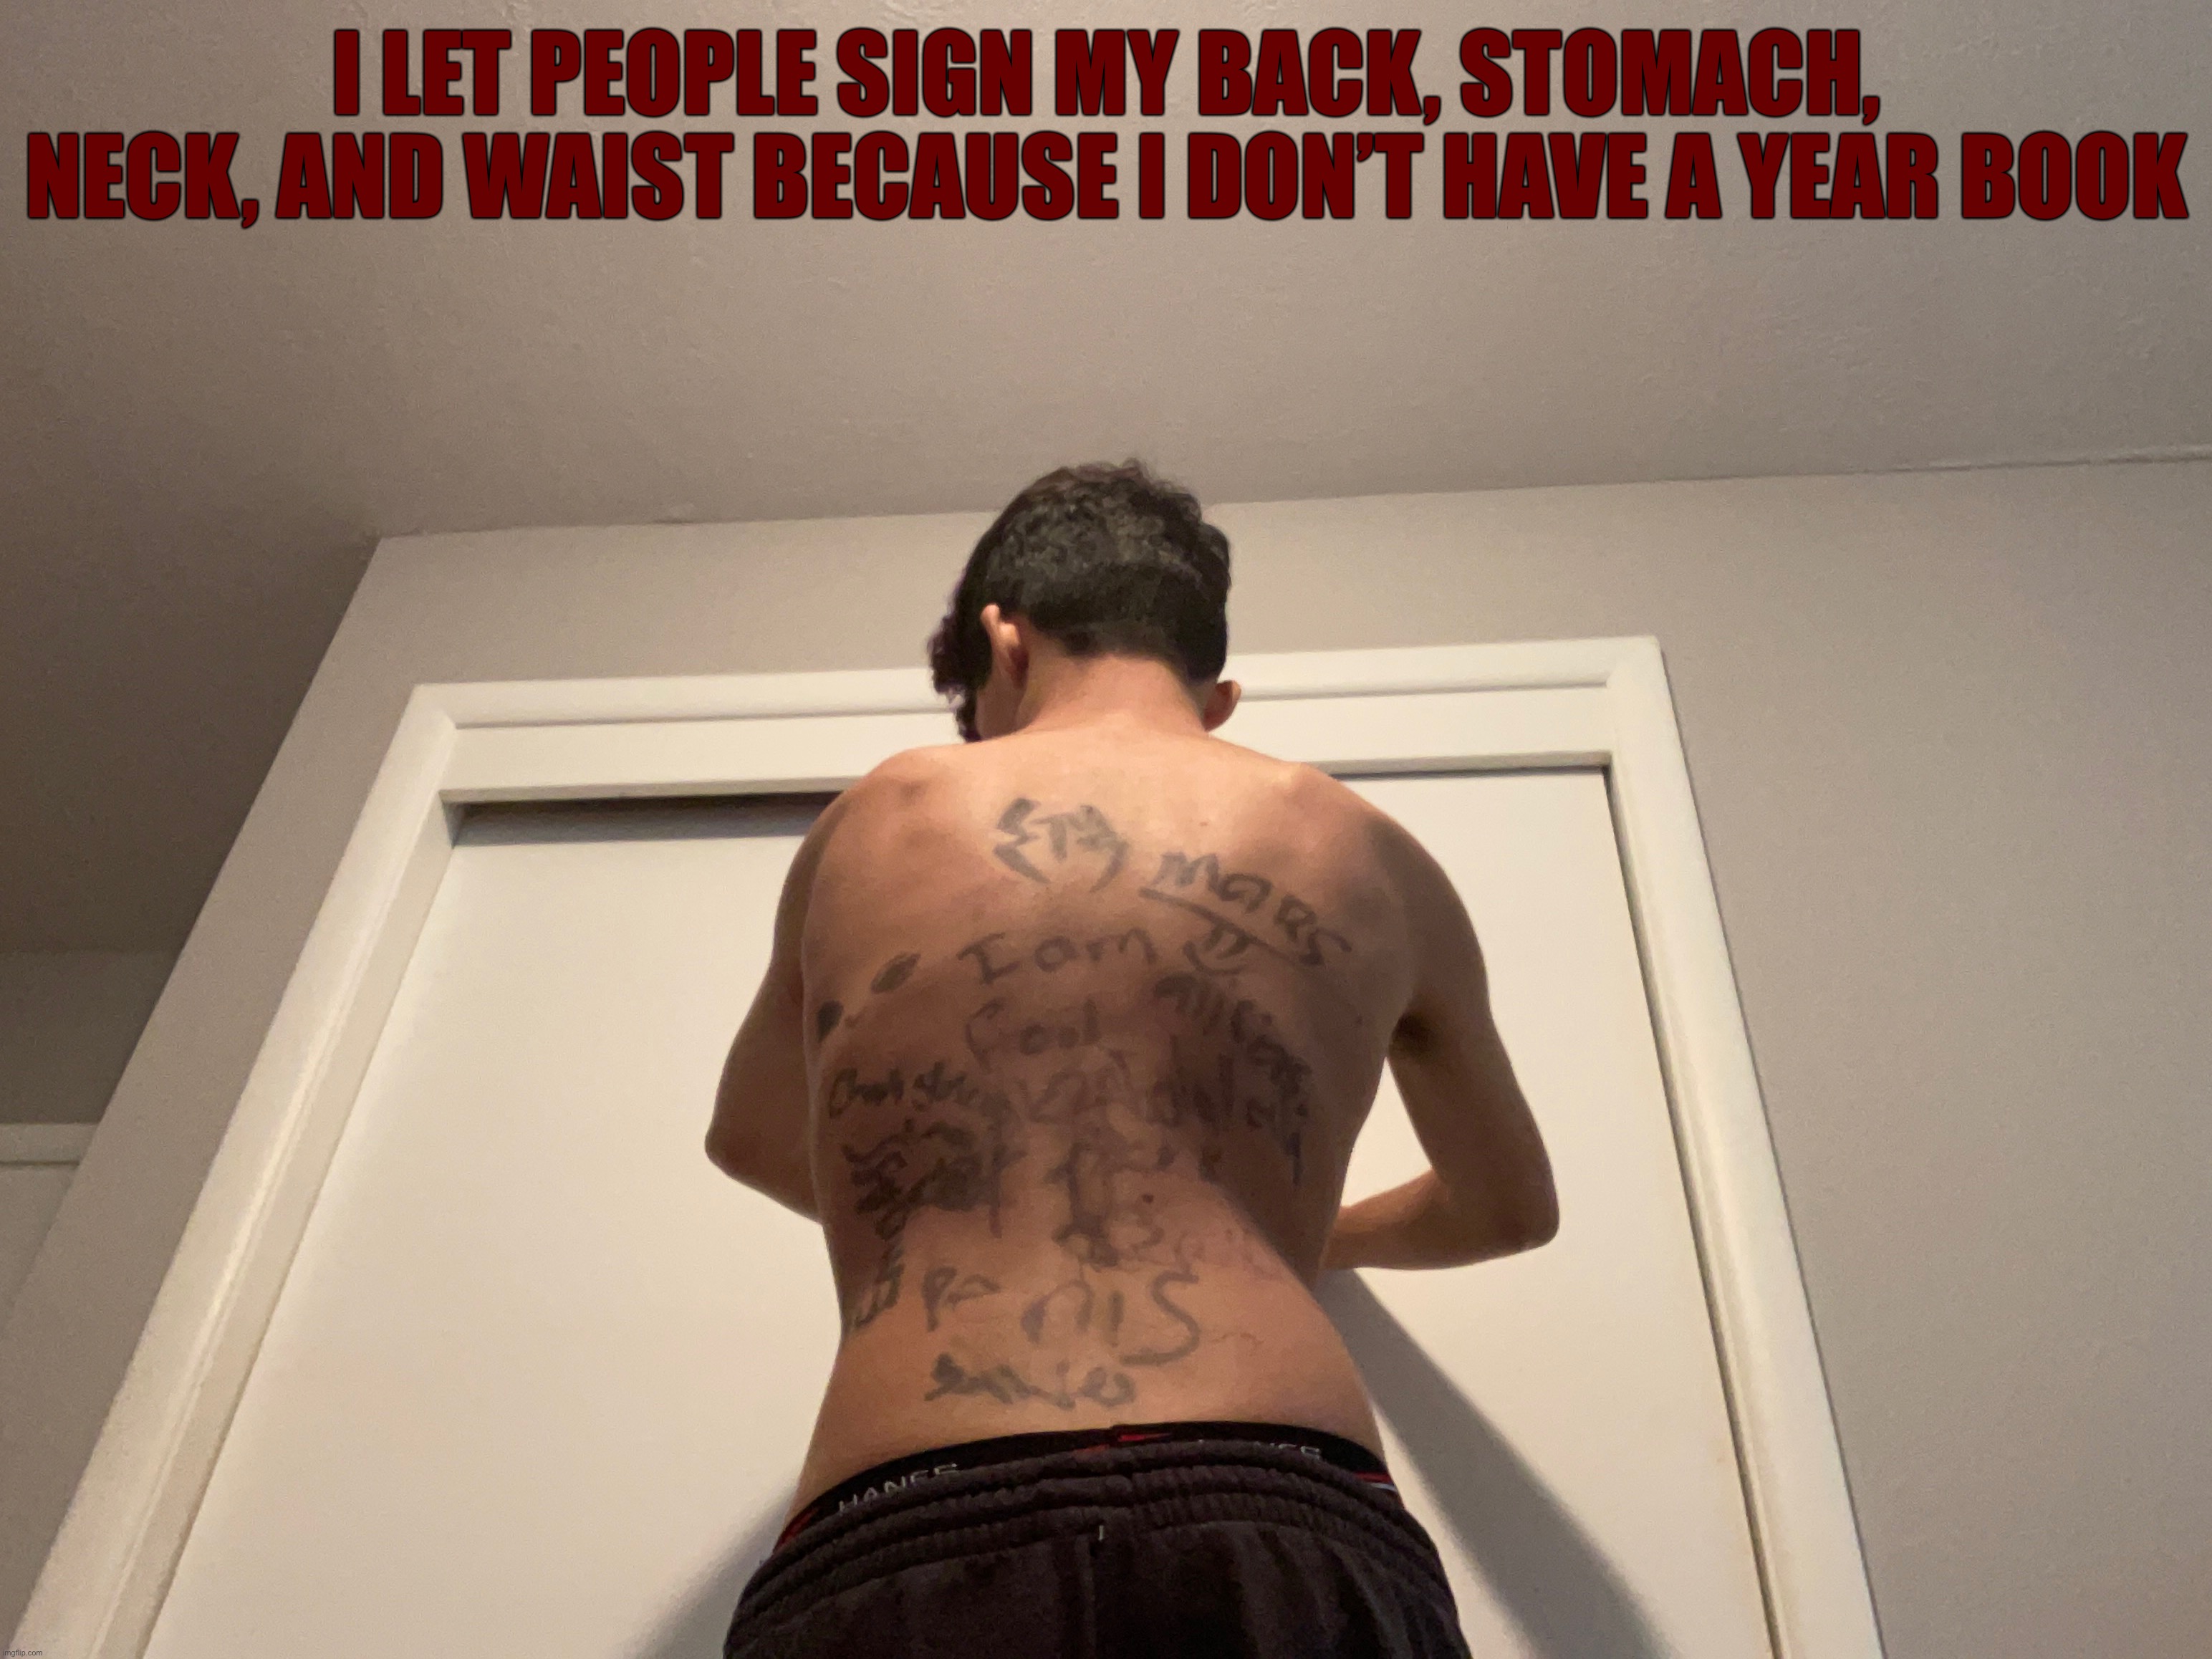 Only people I know | I LET PEOPLE SIGN MY BACK, STOMACH, NECK, AND WAIST BECAUSE I DON’T HAVE A YEAR BOOK | image tagged in middle school | made w/ Imgflip meme maker